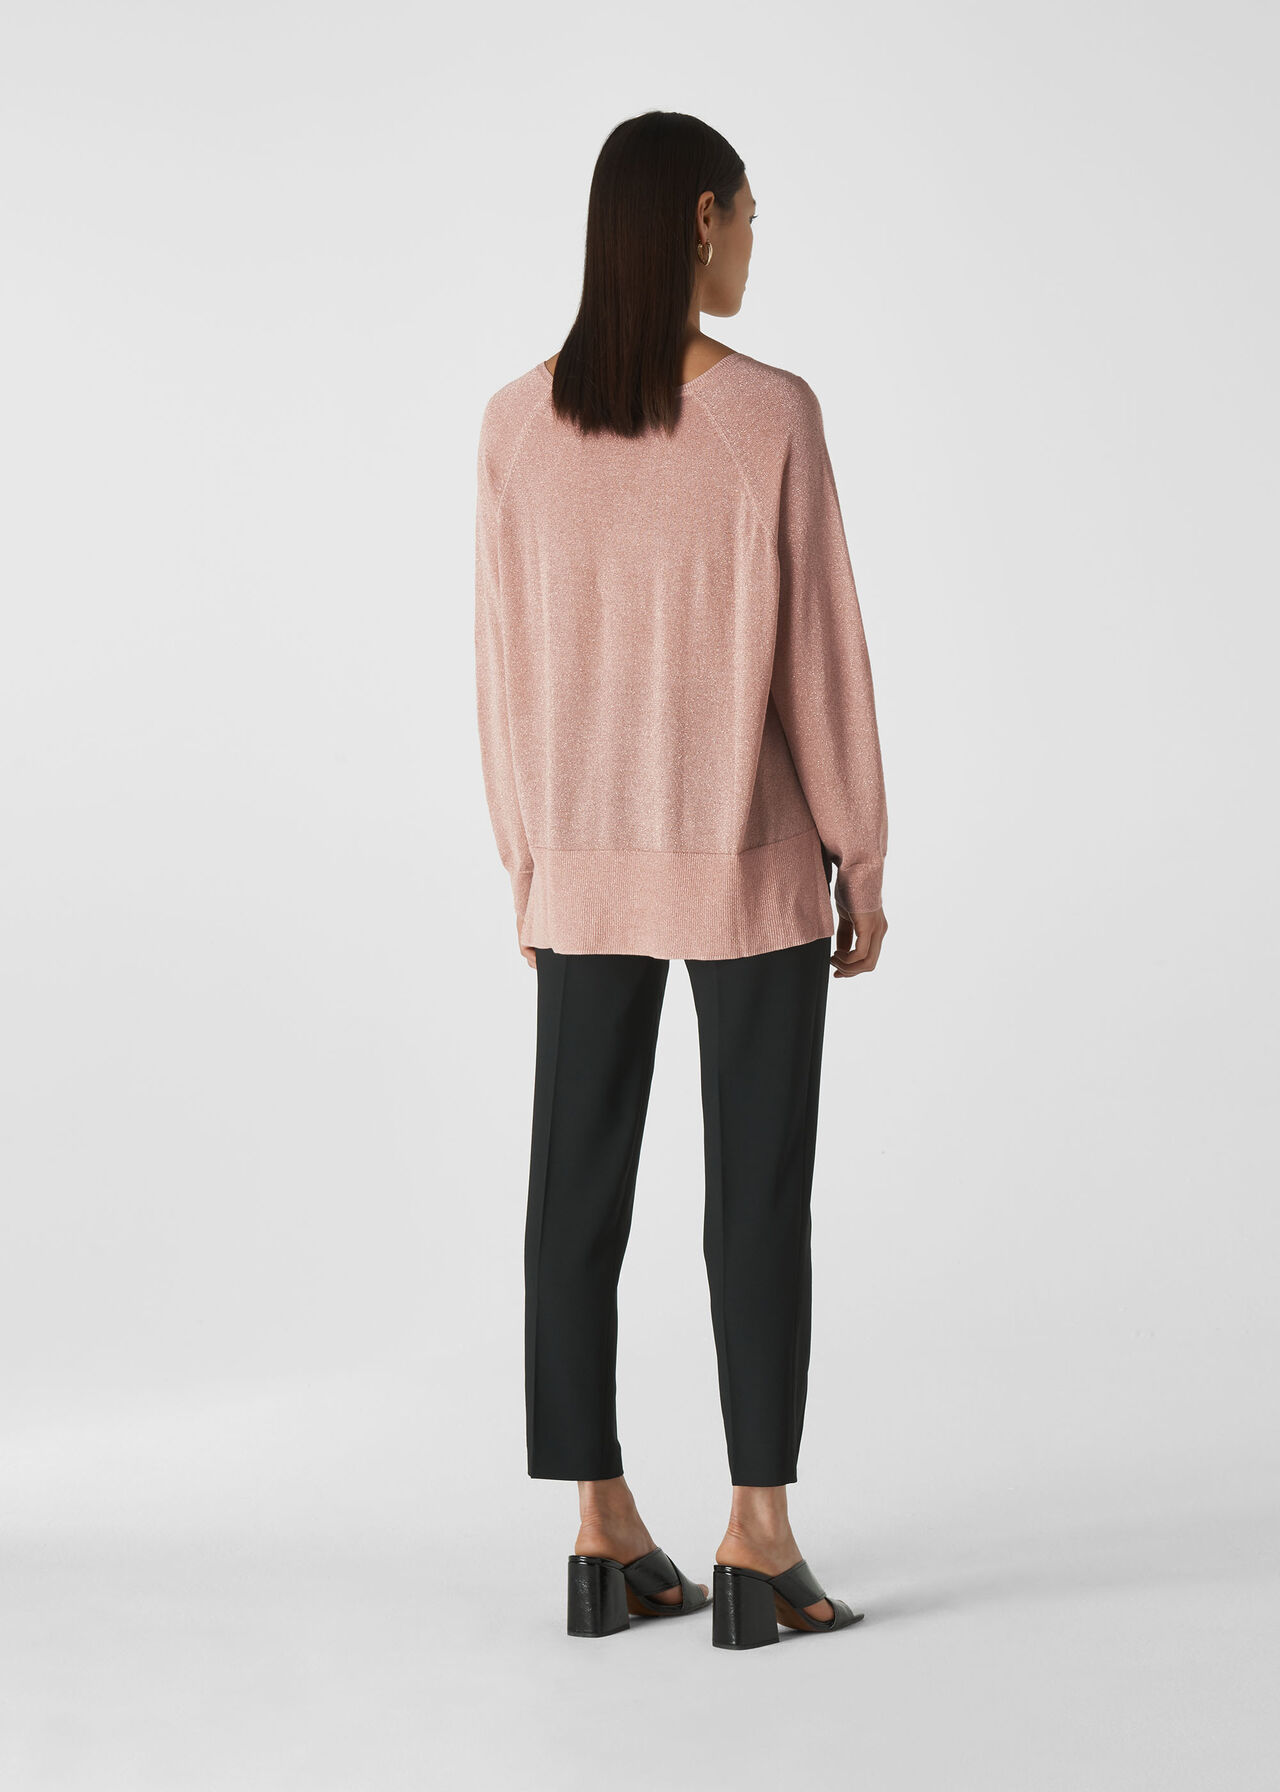 Pale Pink Sparkle Scoop Neck Knit | WHISTLES